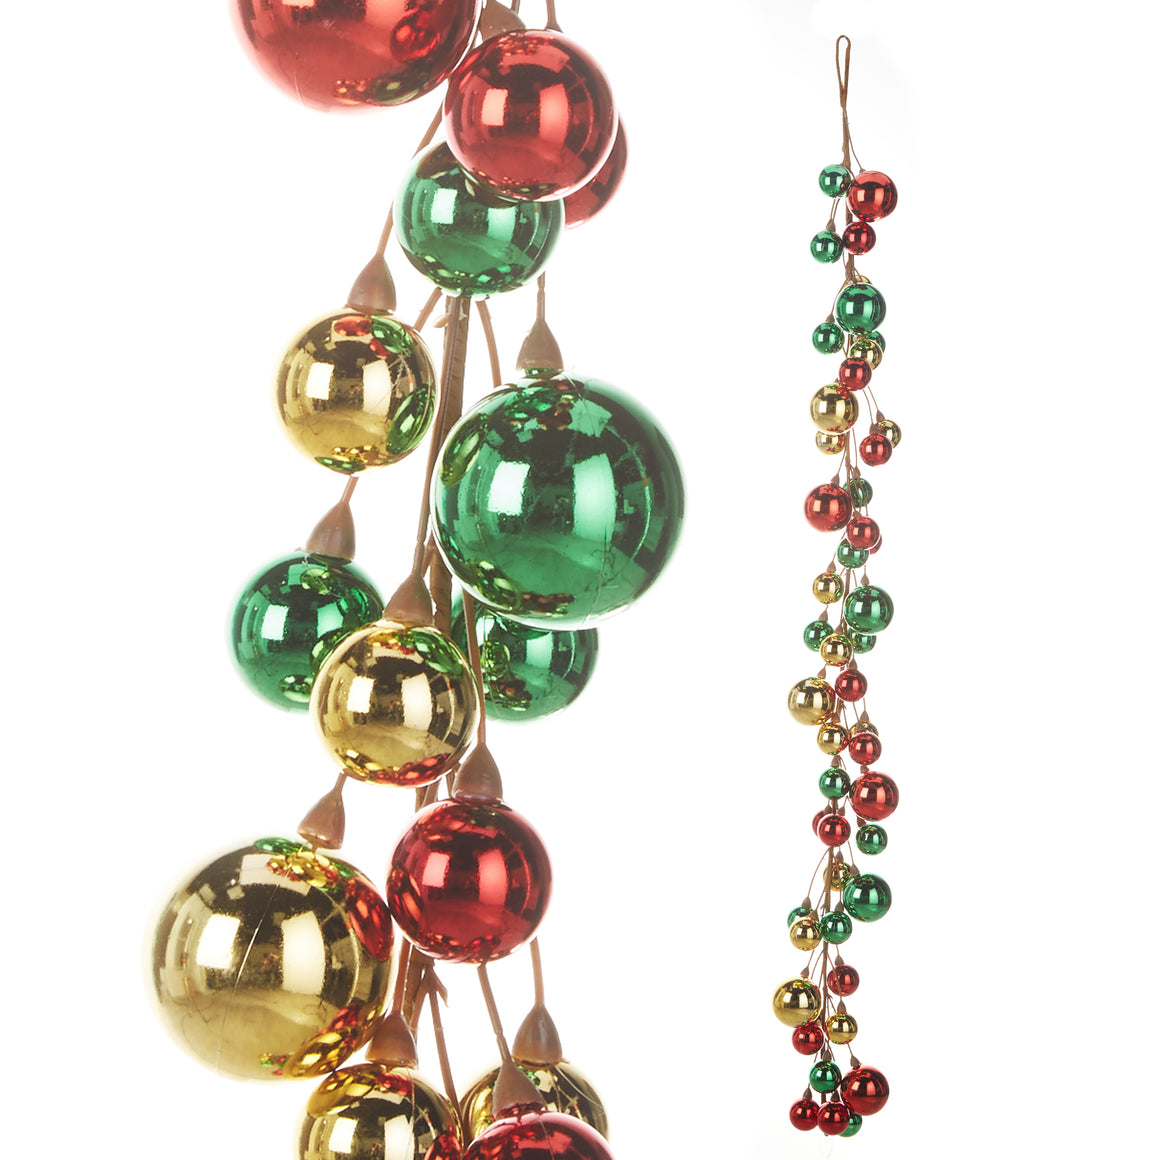 48 Inch Christmas Ball Ornament Garland with Shatterproof Balls of Red, Green and Gold